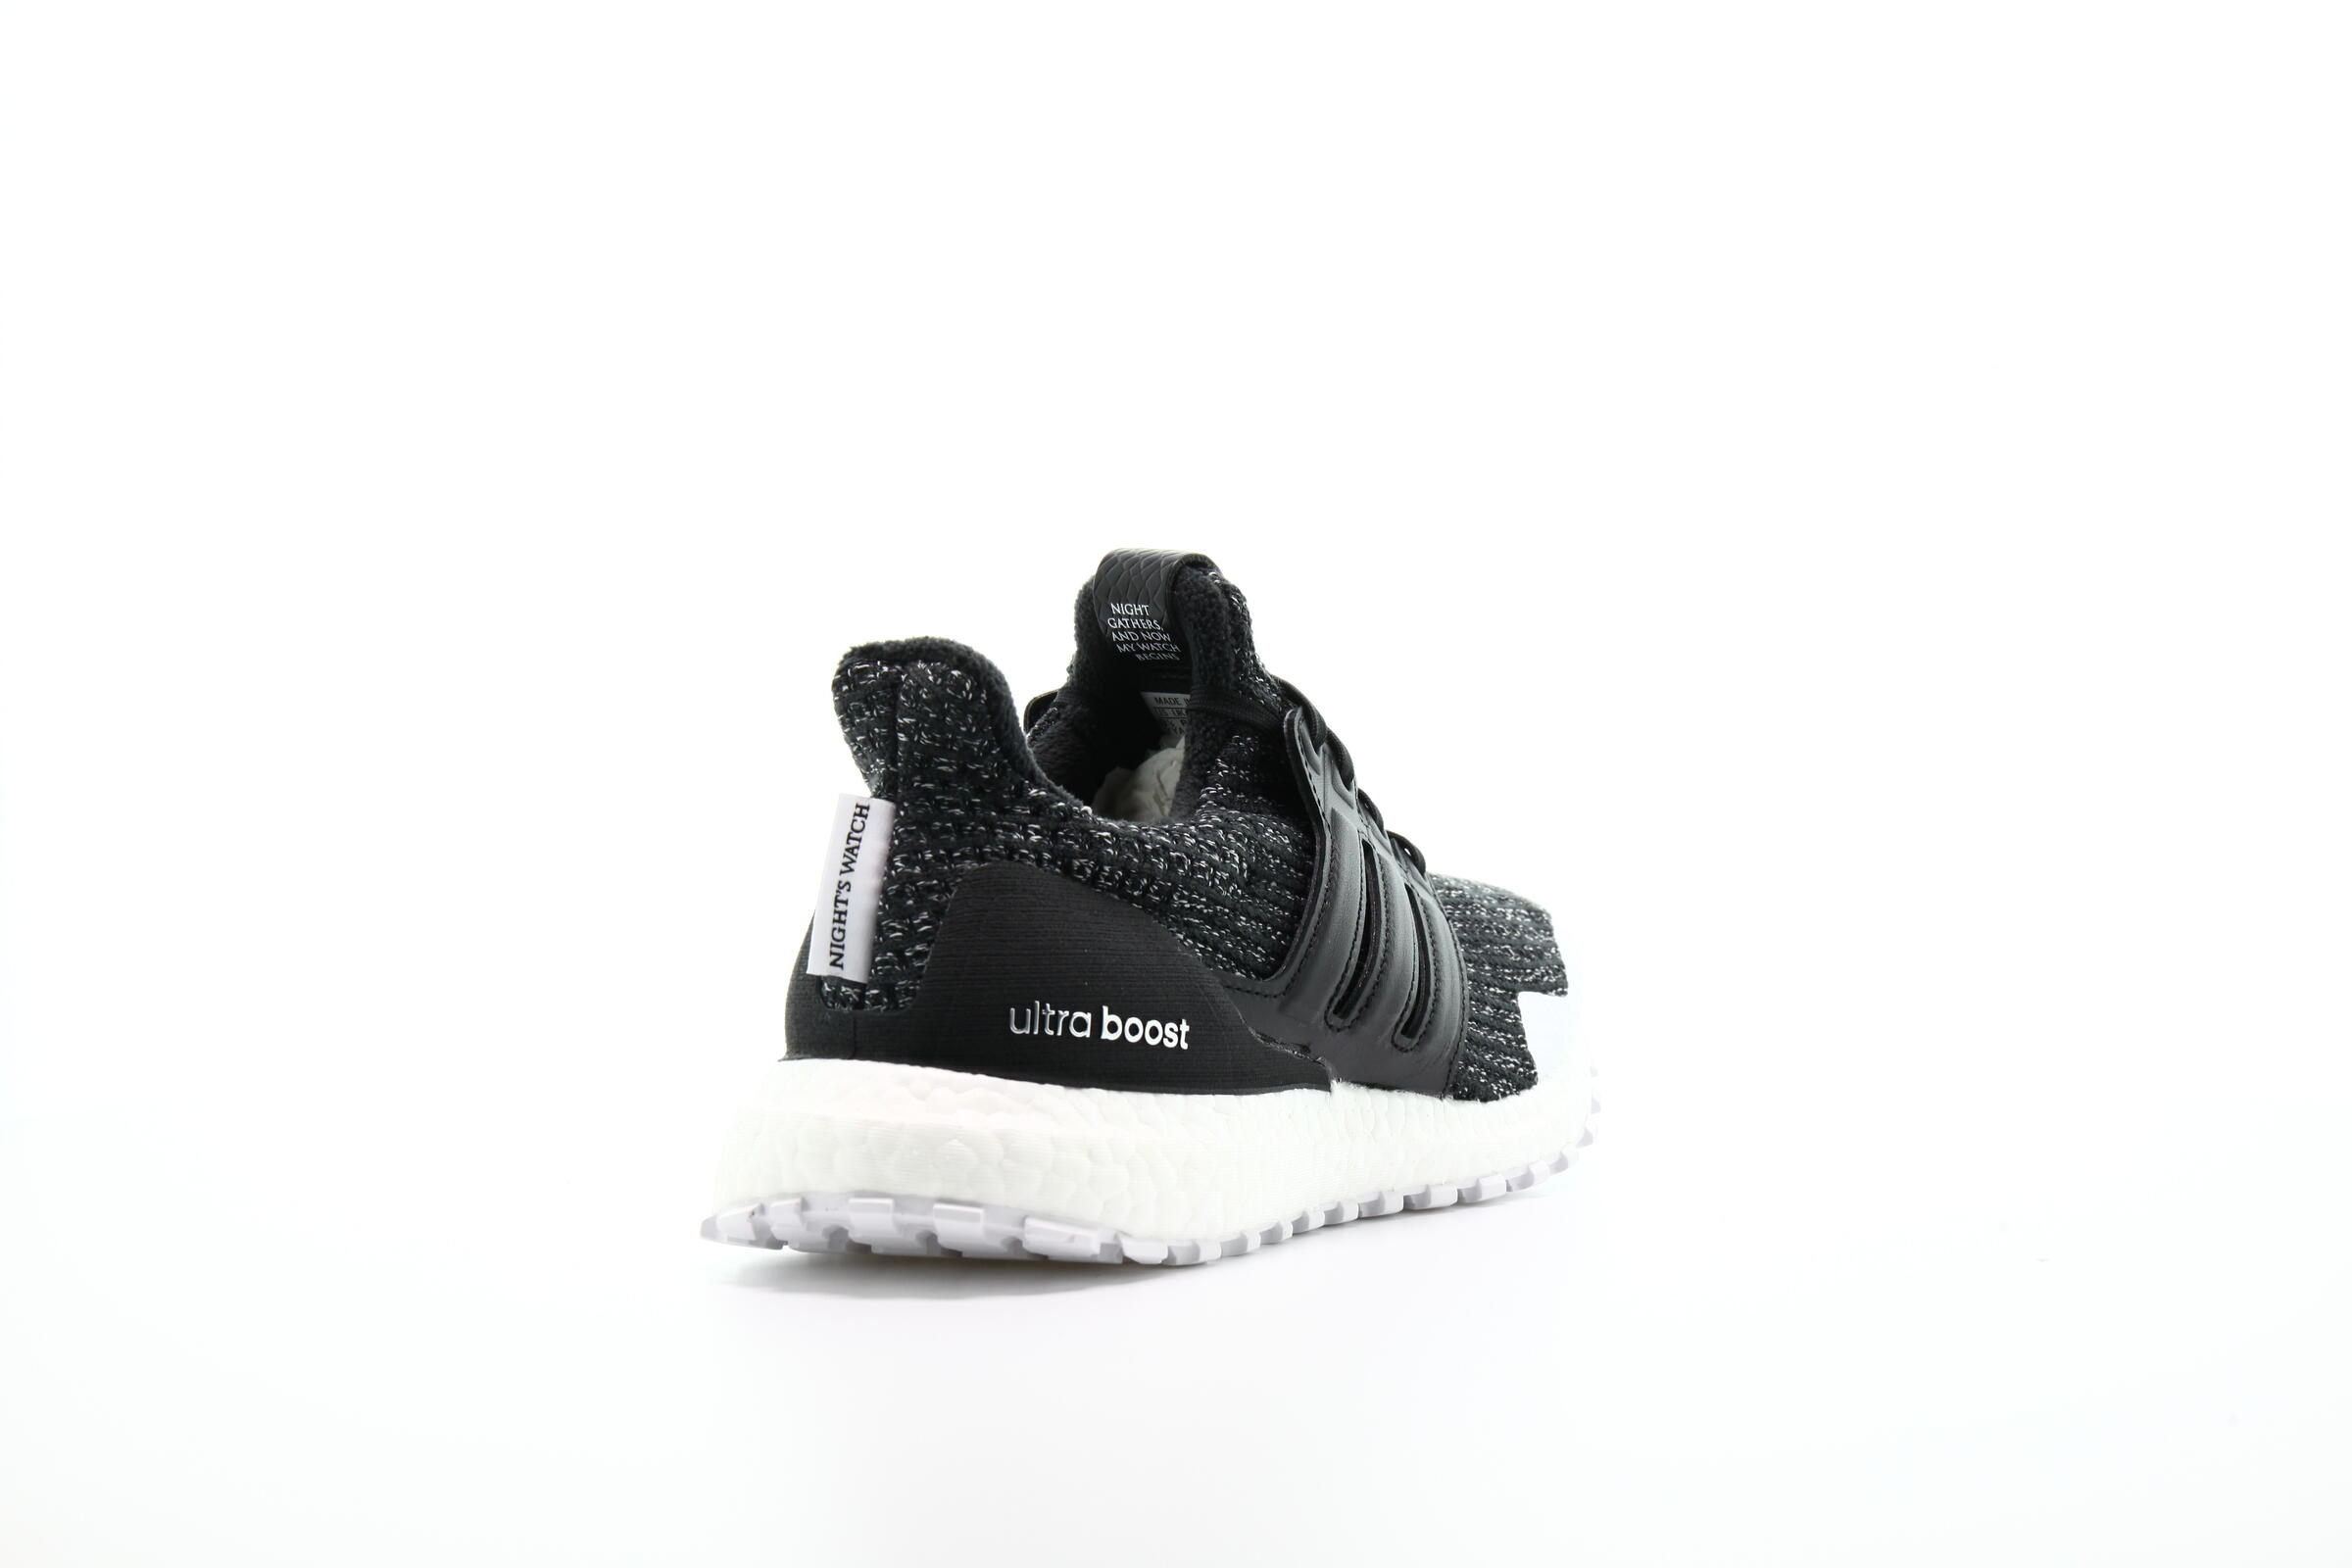 adidas Performance x Game of Thrones Ultraboost "Night's Watch"